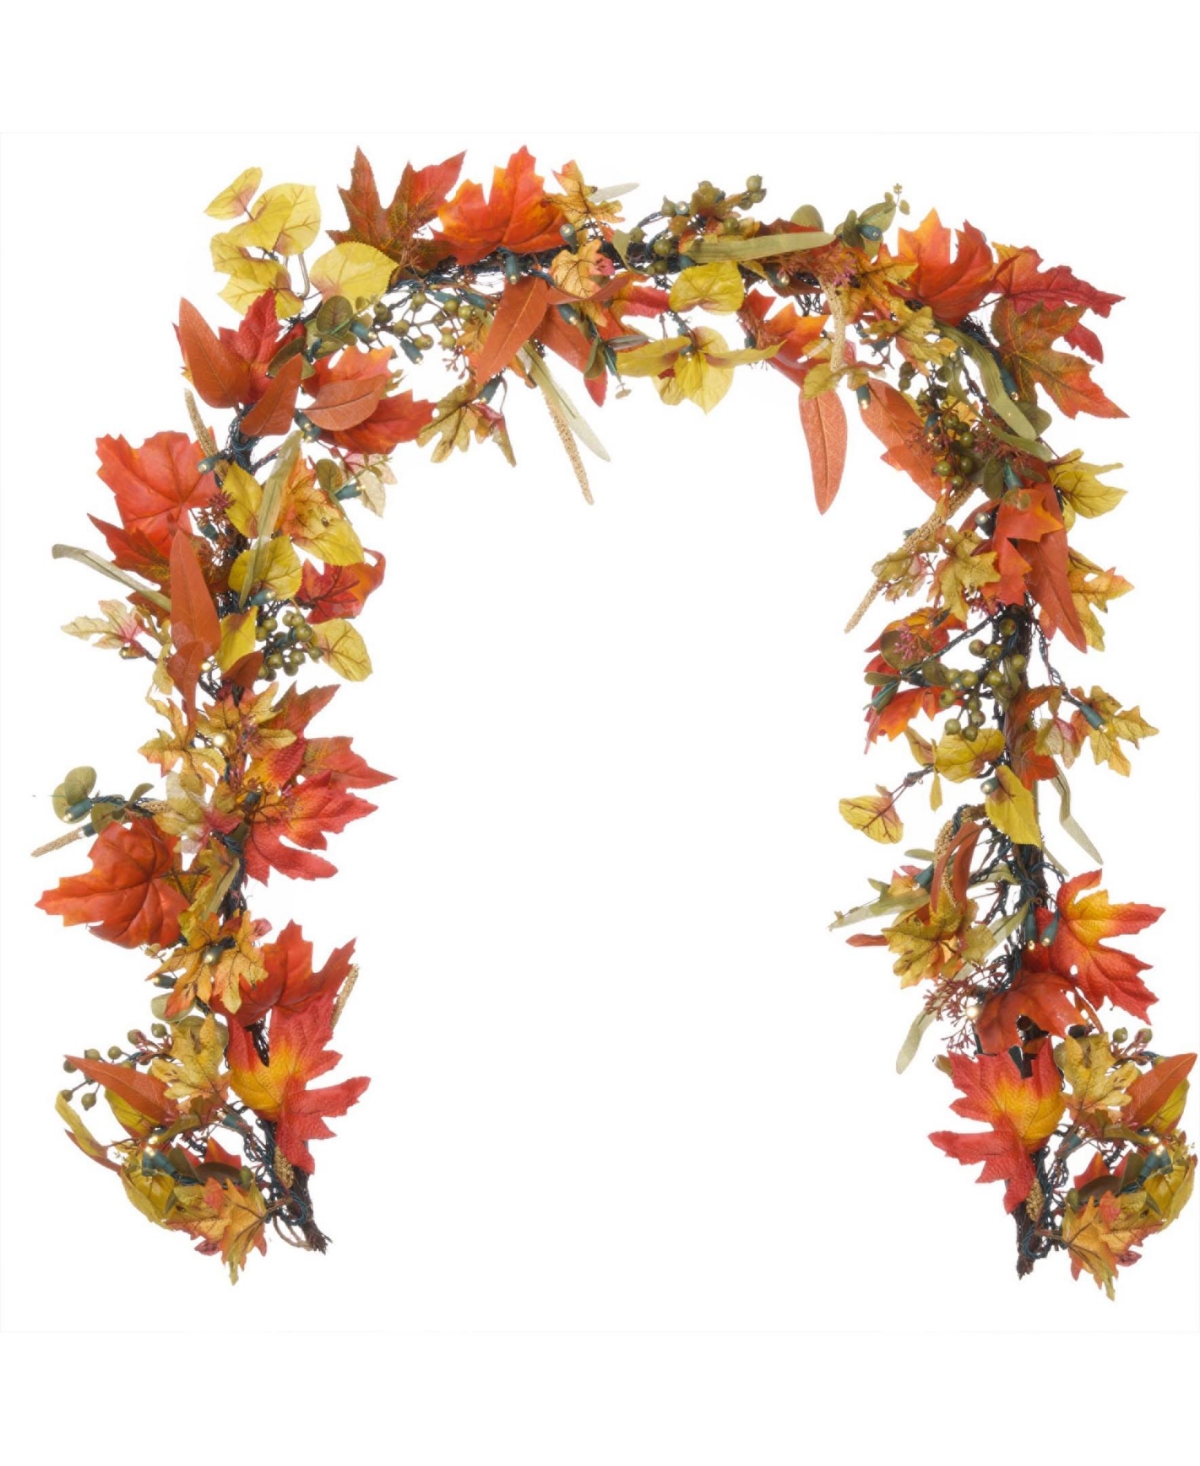 Company 9' Artificial Garland with Lights, Fall Harvest Leaf - Assorted